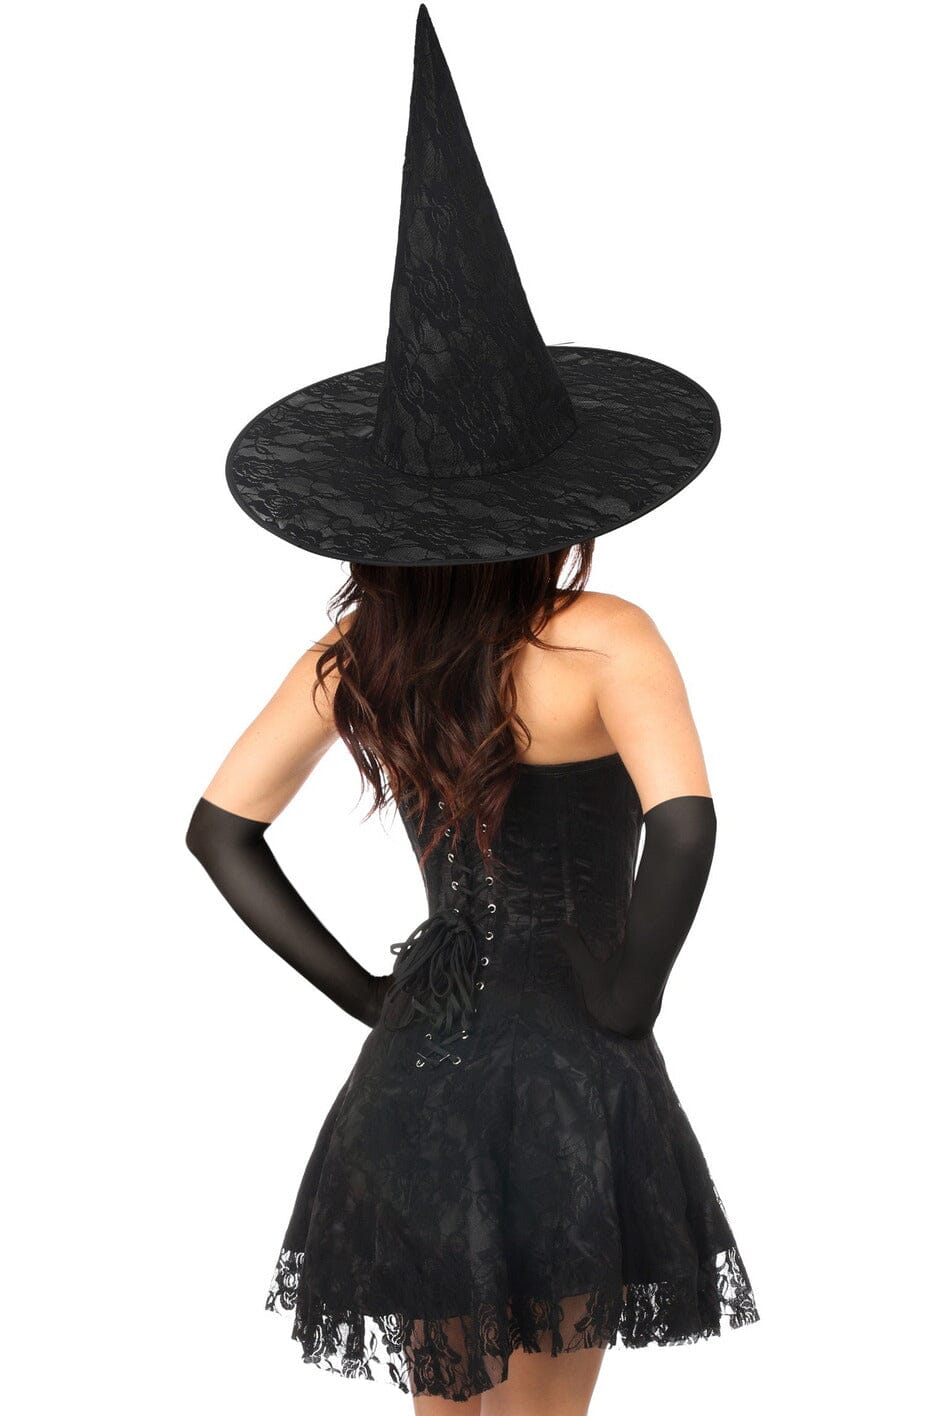 Lavish 3 PC Sultry Witch Corset Dress Costume-Witch Costumes-Daisy Corsets-SEXYSHOES.COM